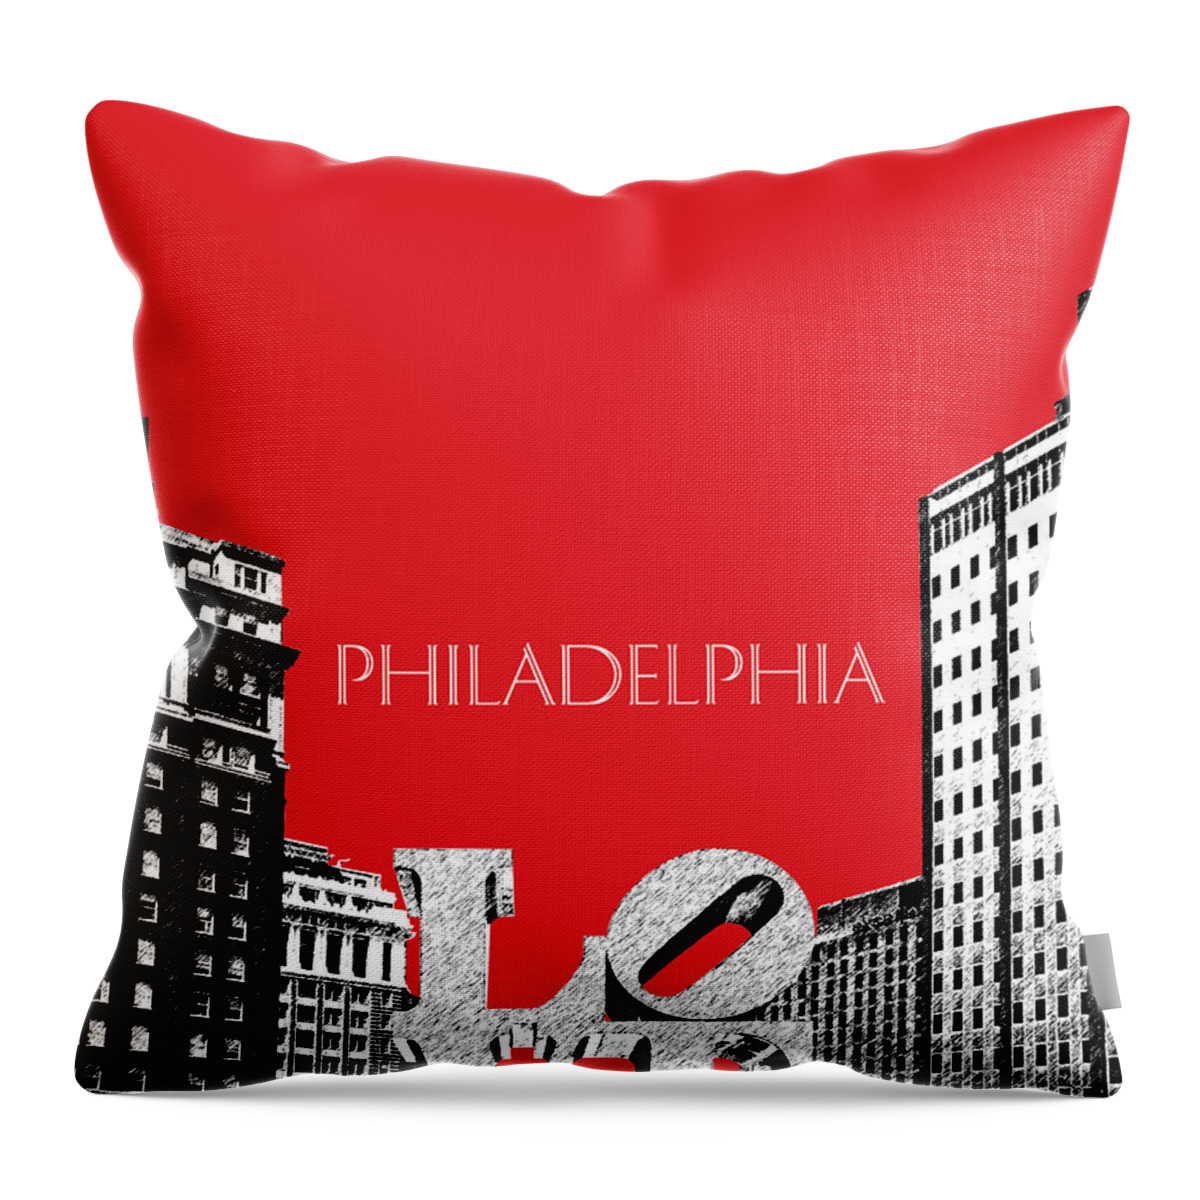 Architecture Throw Pillow featuring the digital art Philadelphia Skyline Love Park - Red by DB Artist